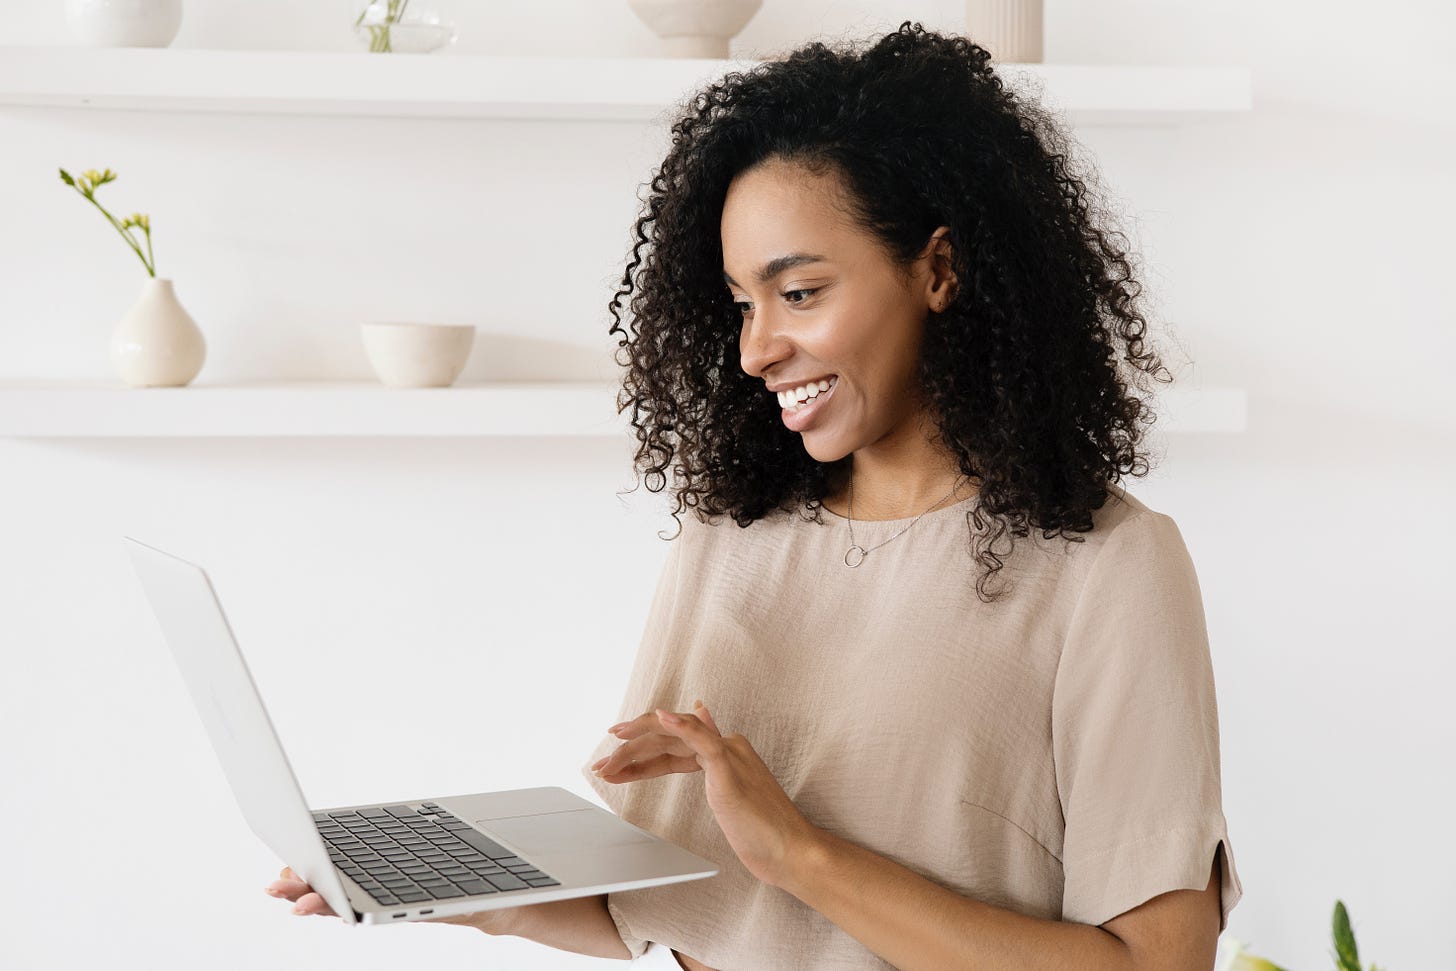 Woman using her laptop and smiling on white background